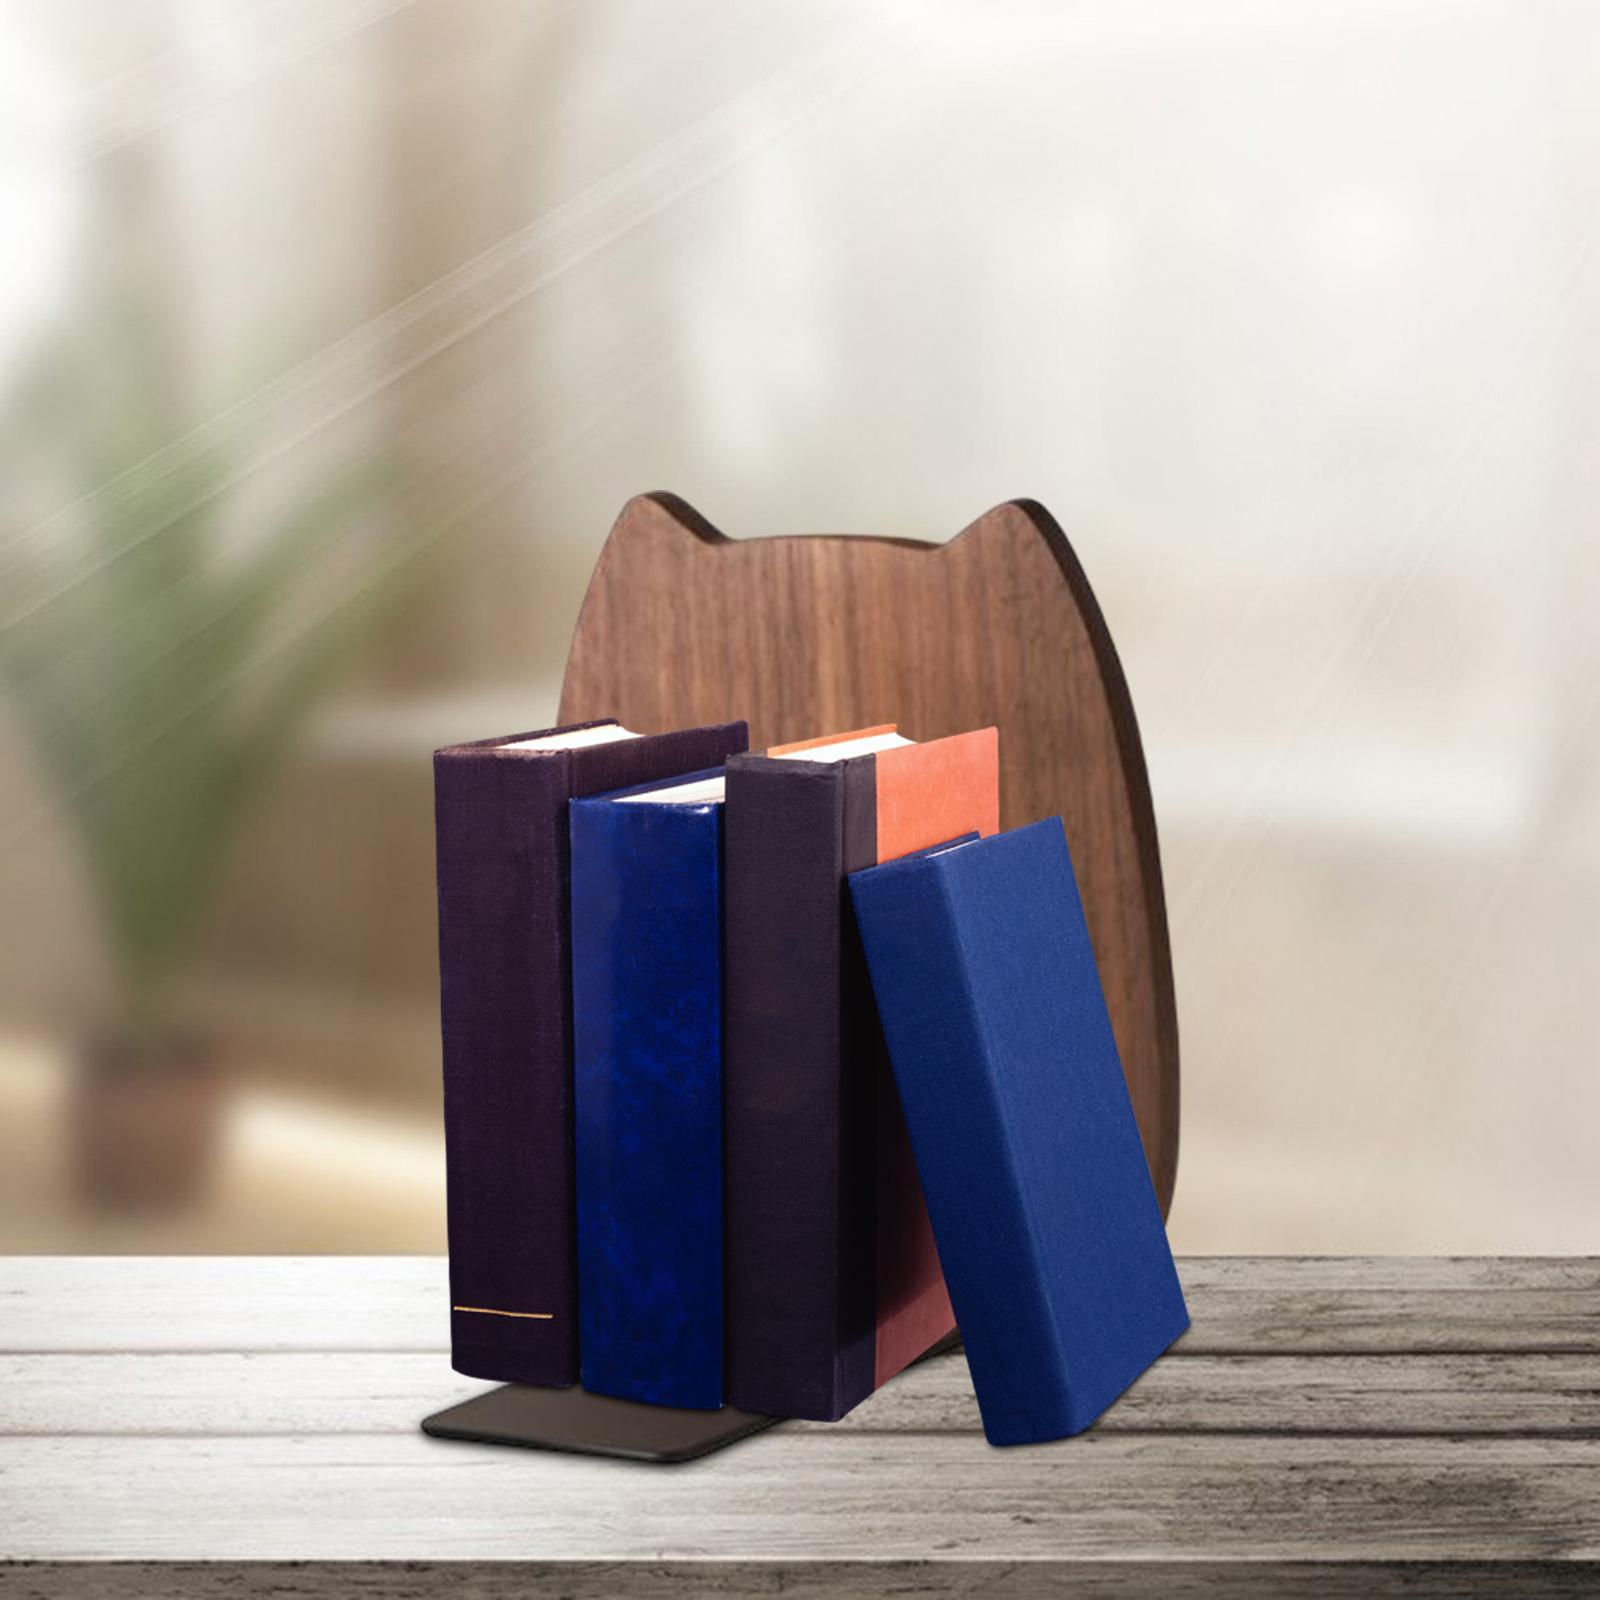 Wooden Bookends Decorative Bookends for Shelves for Home Children Classmates